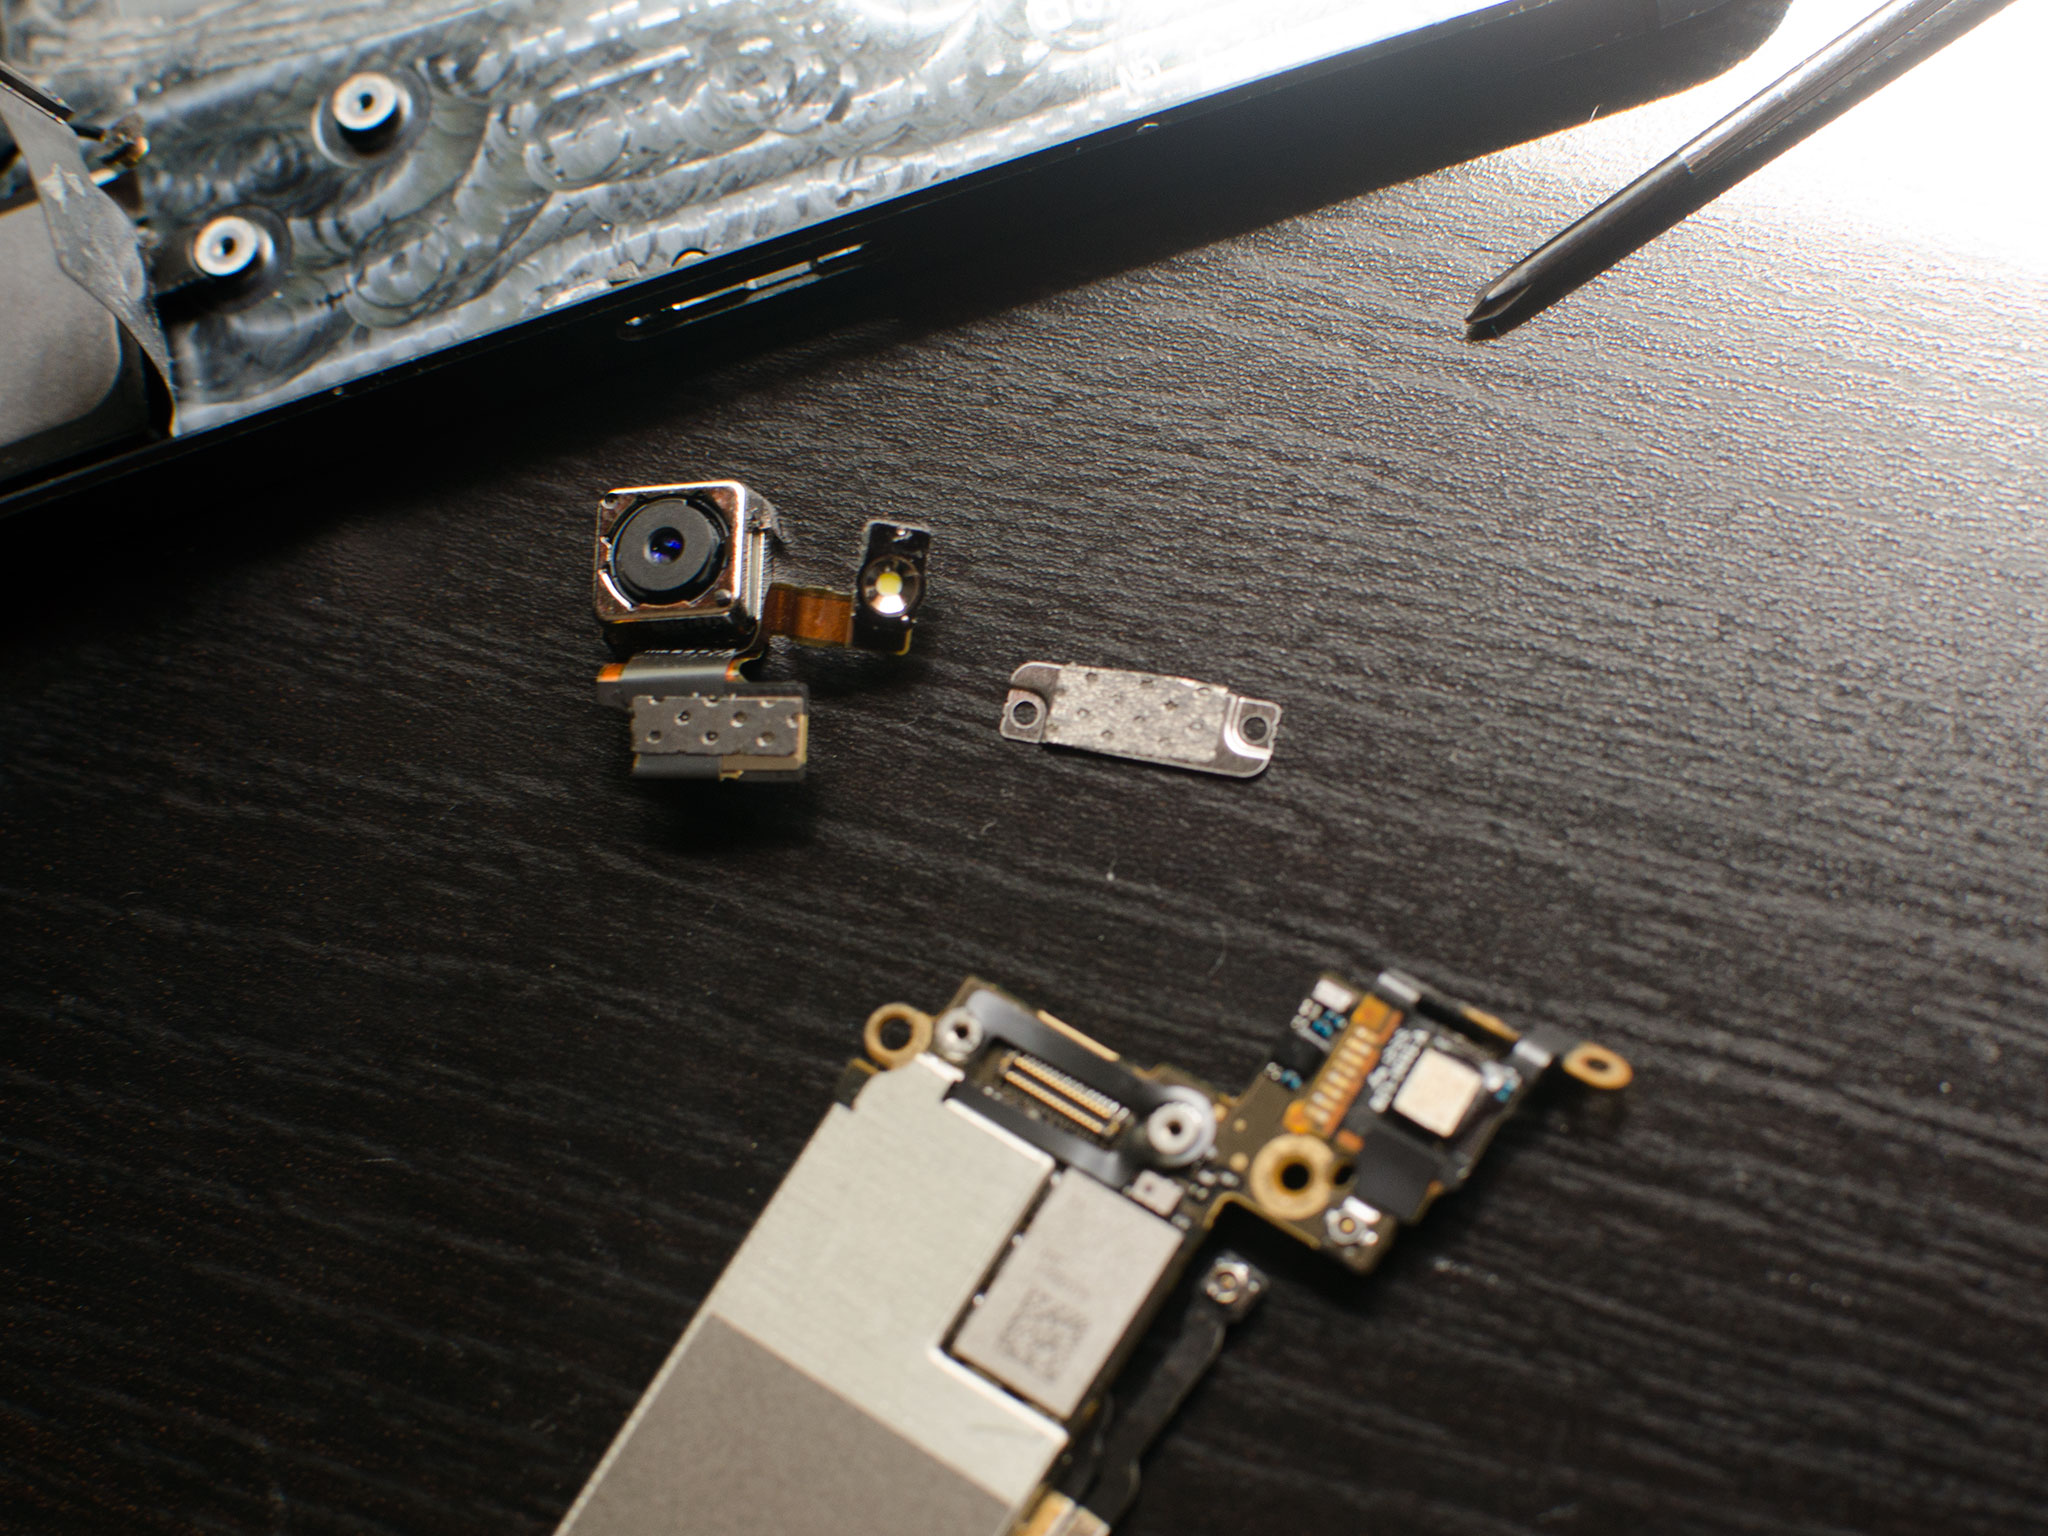 How to replace the rear iSight camera in an iPhone 5